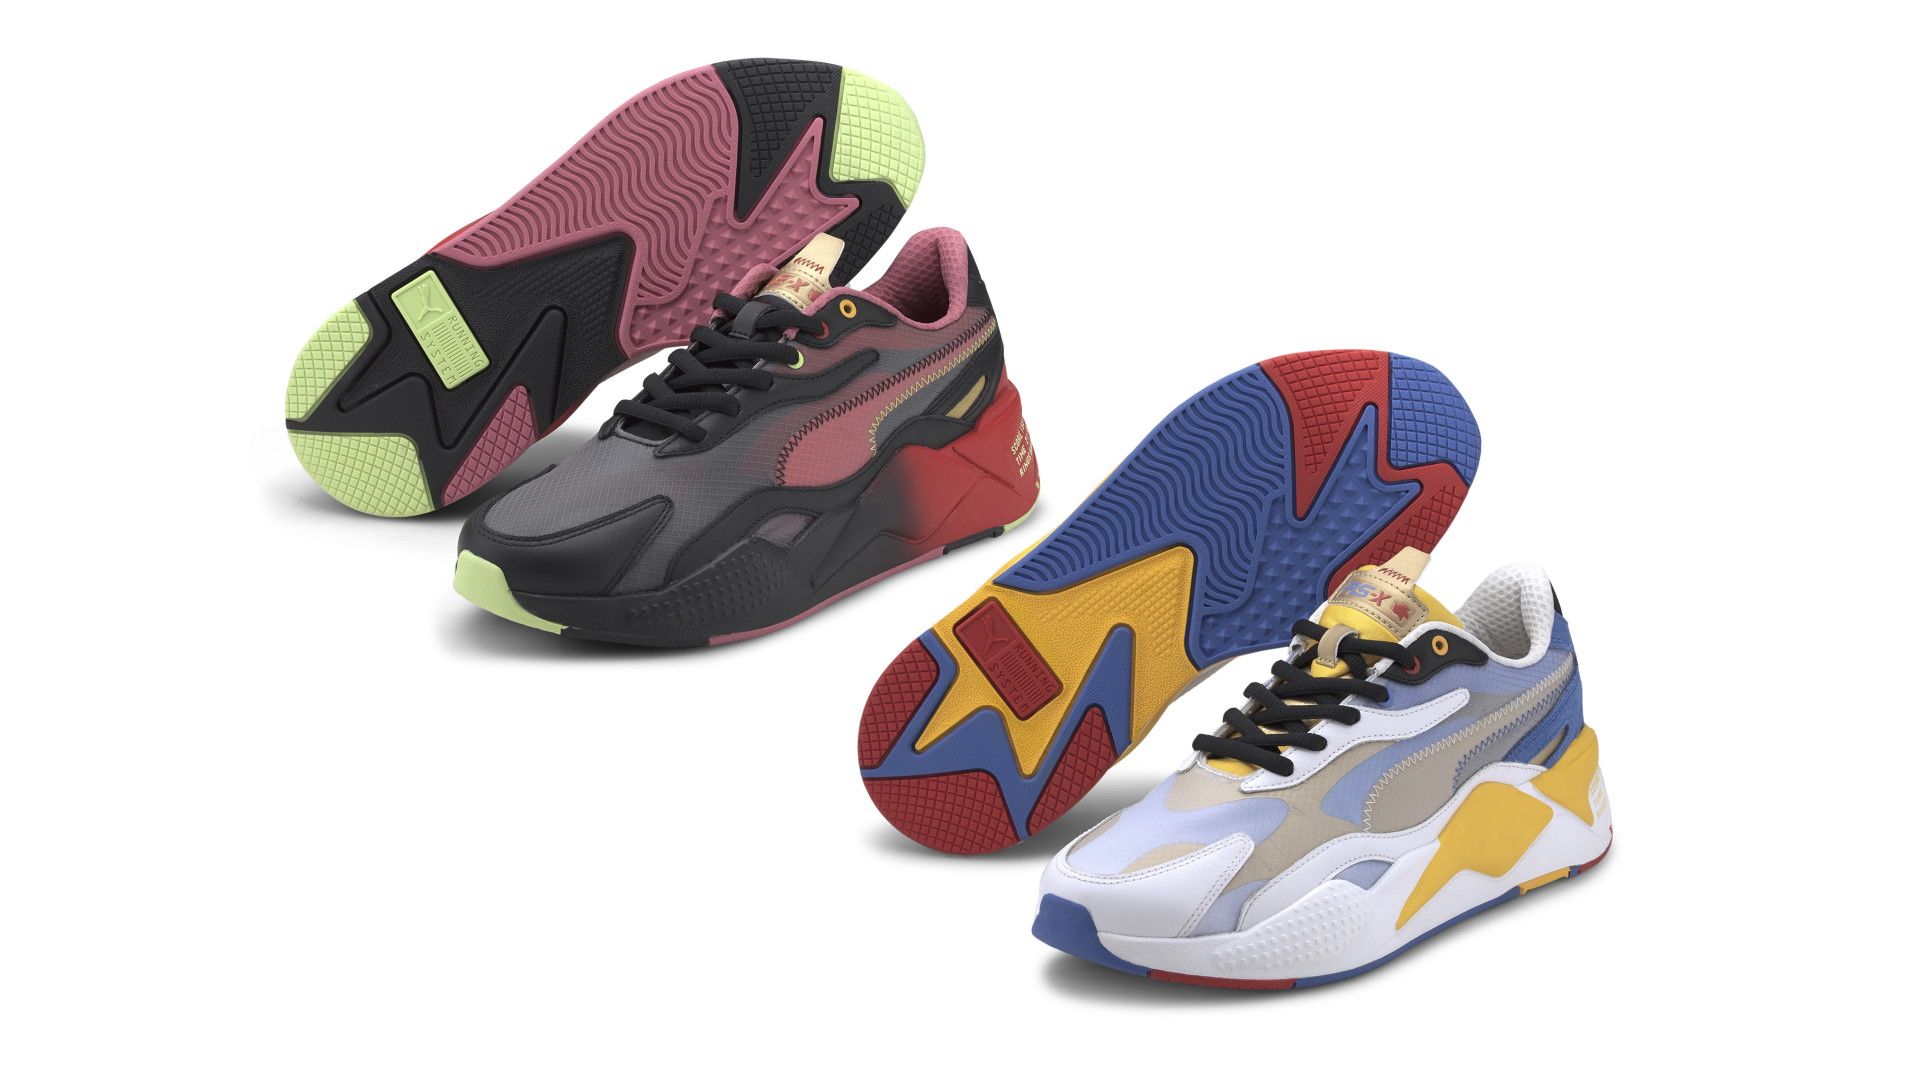 New Sonic sneakers from Puma are for runners that gotta go fast